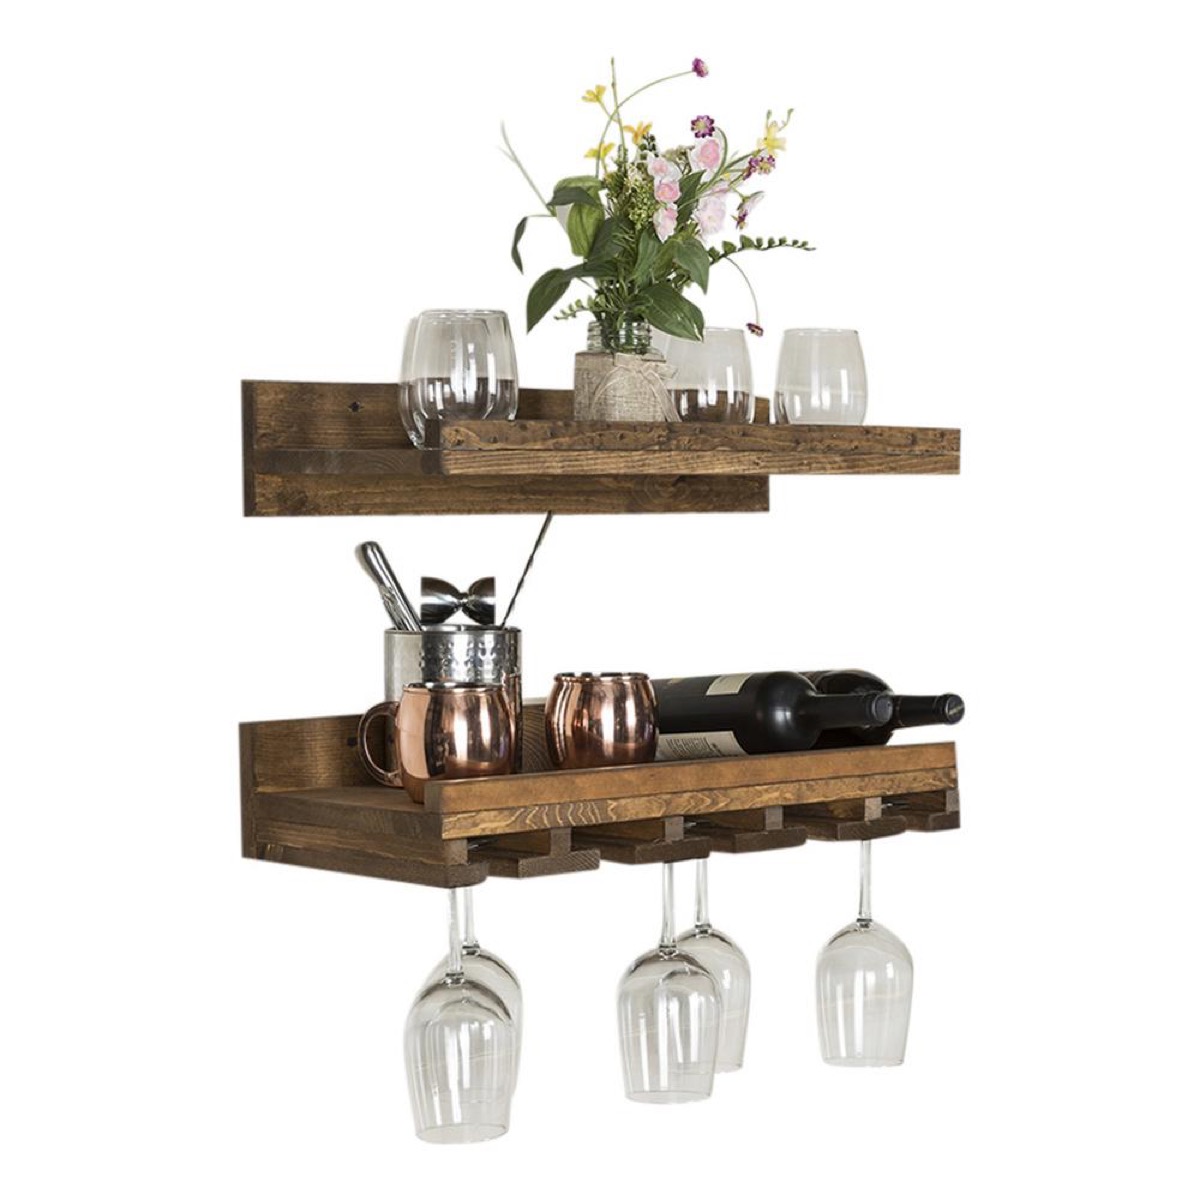 Wooden Shelves with Glass Storage Home Depot